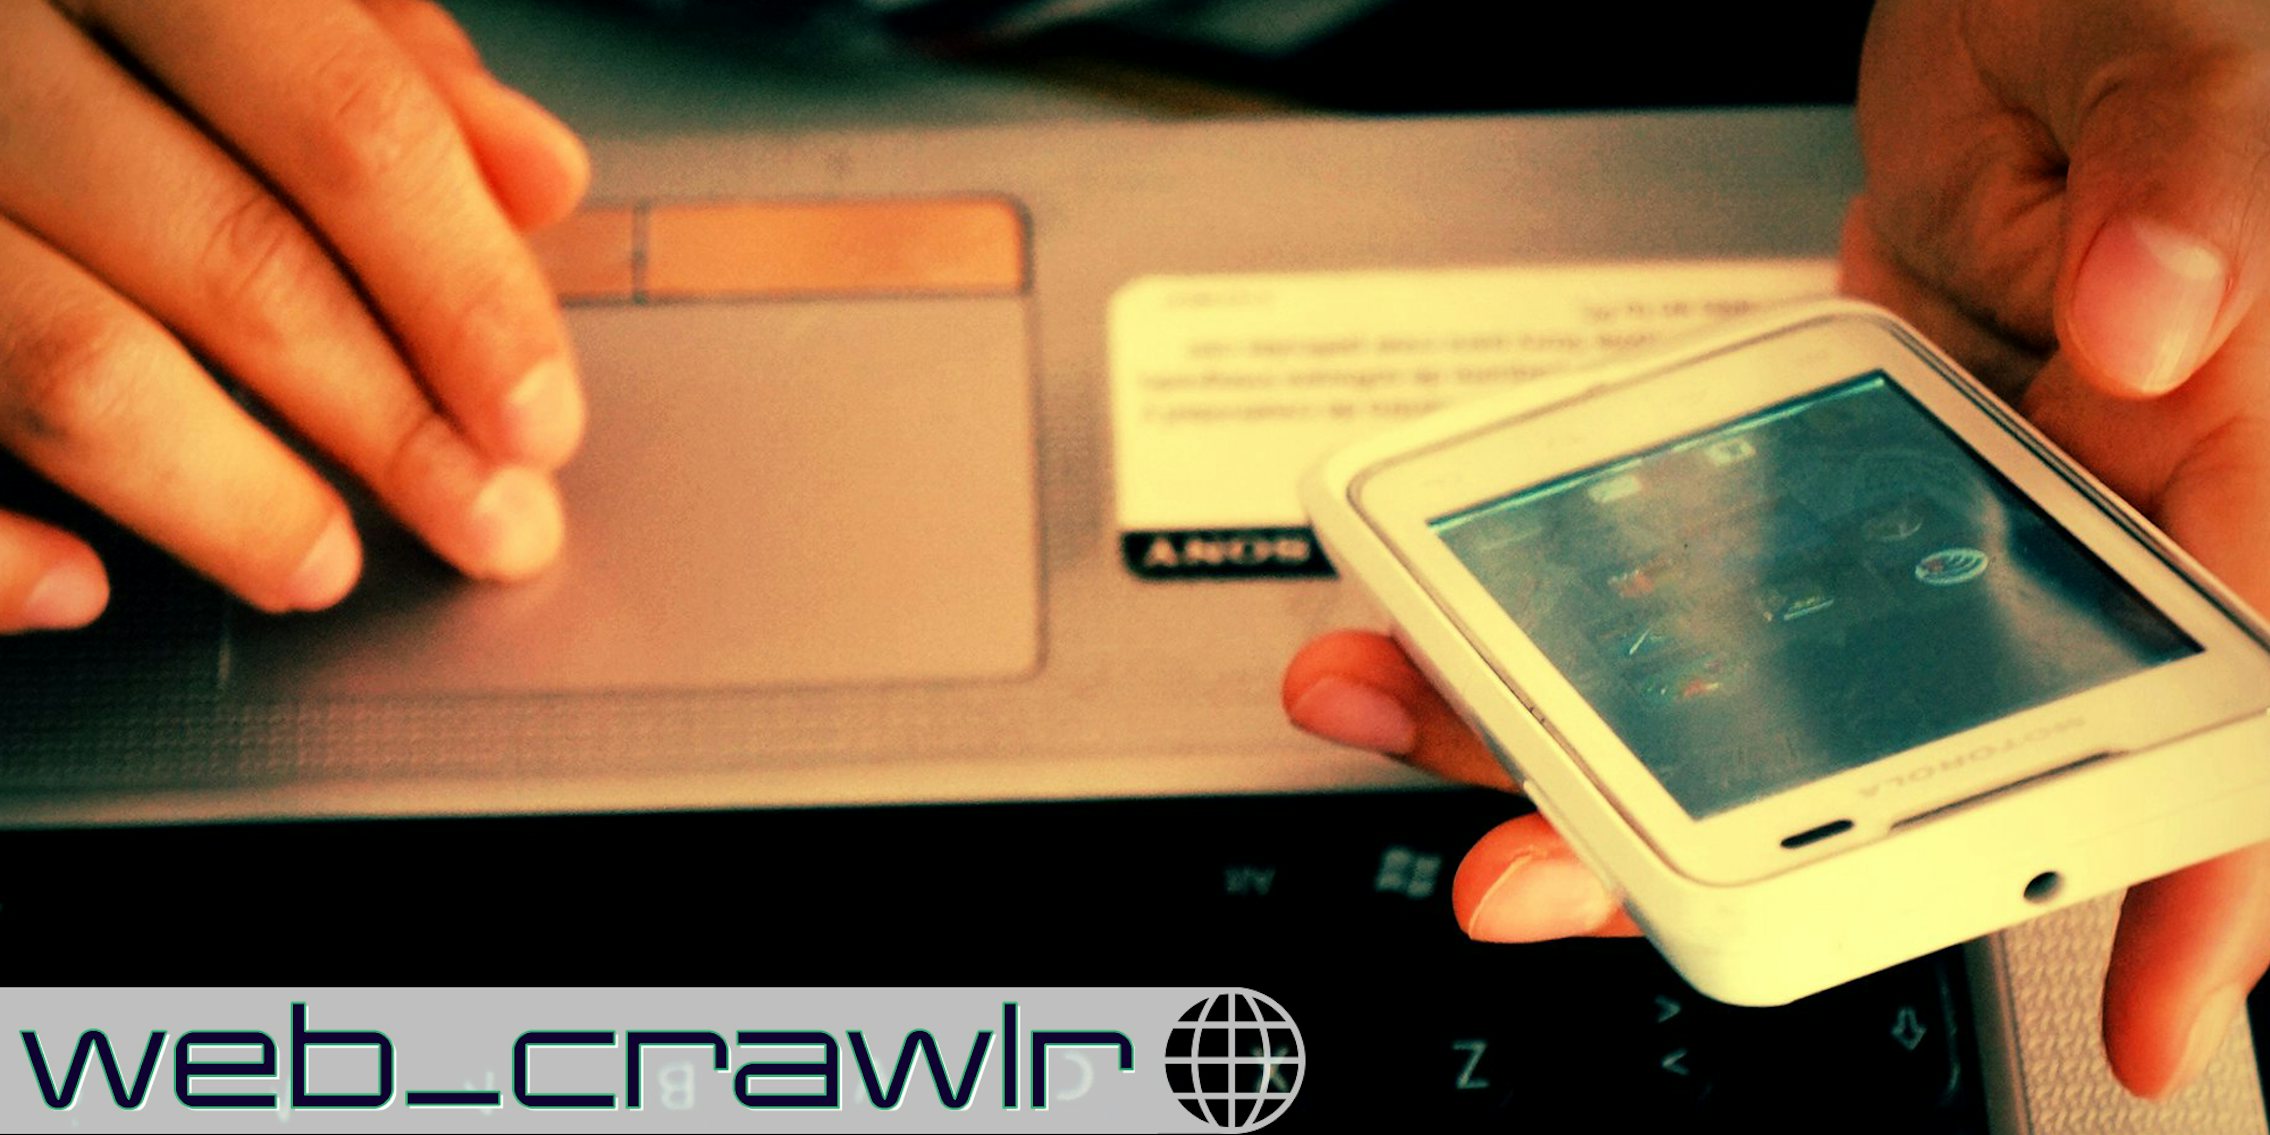 A person holding a smartphone on a laptop. The Daily Dot newsletter web_crawlr logo is in the bottom left corner.